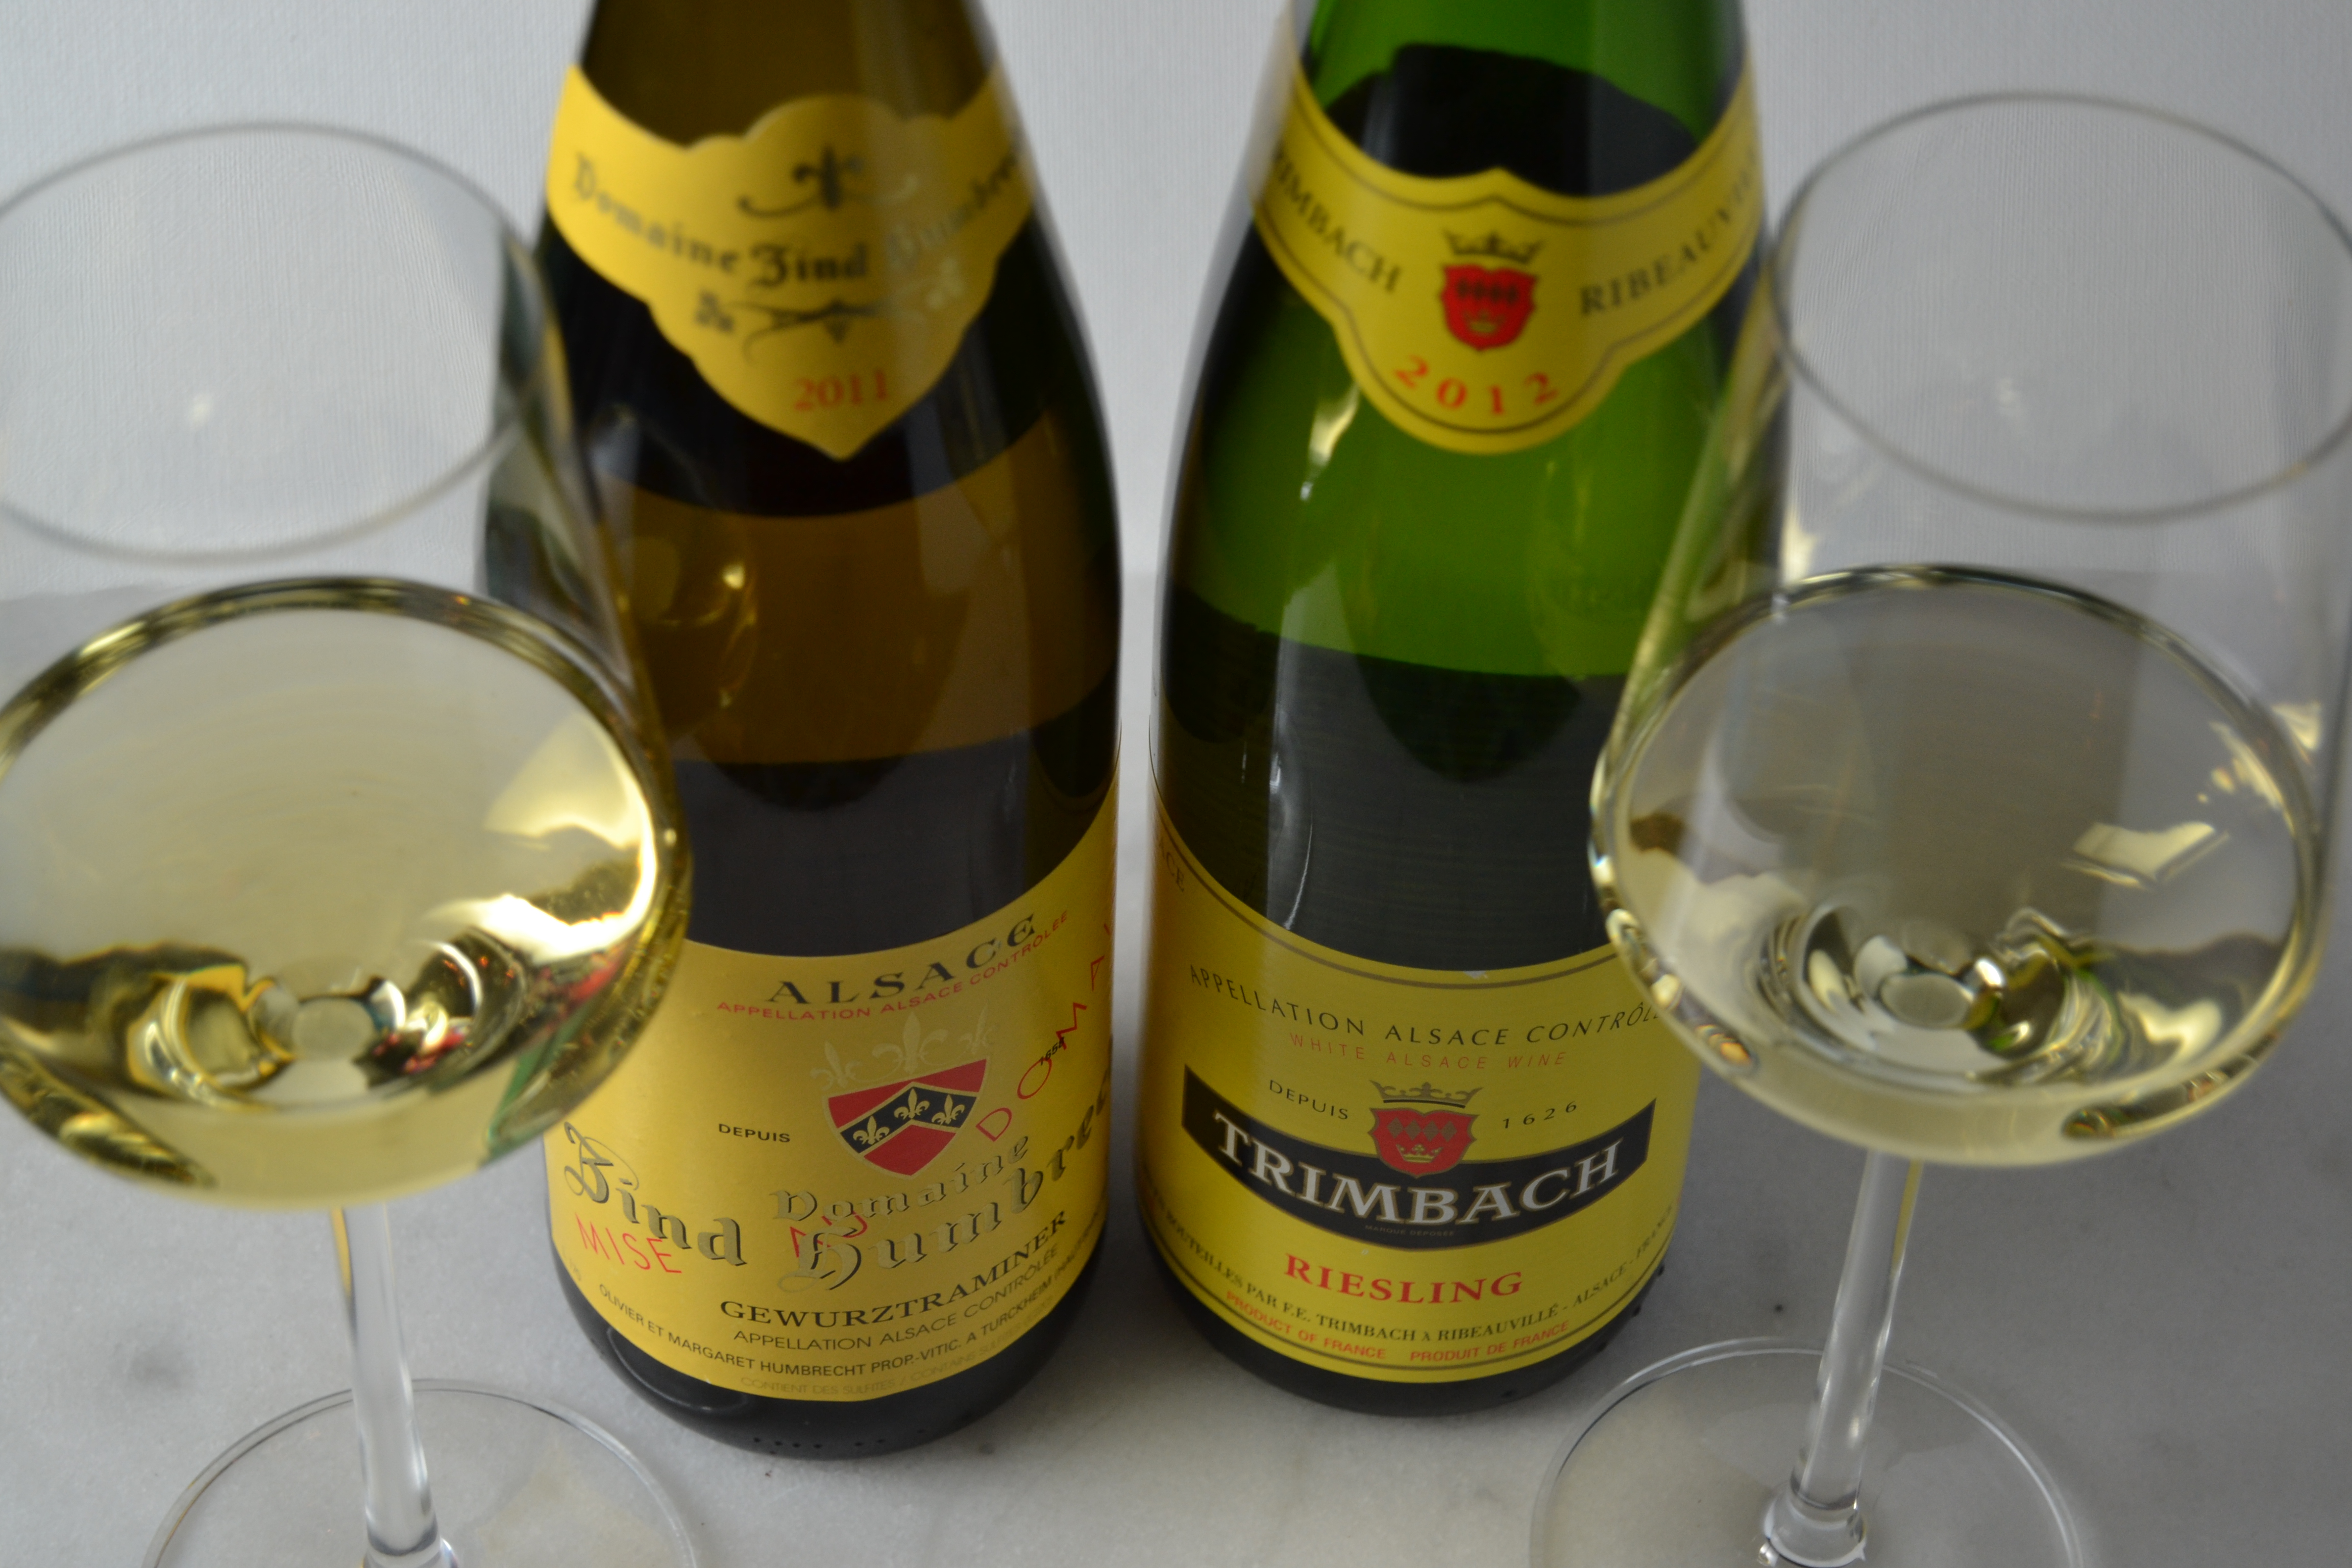 The French #Winophiles go to Alsace